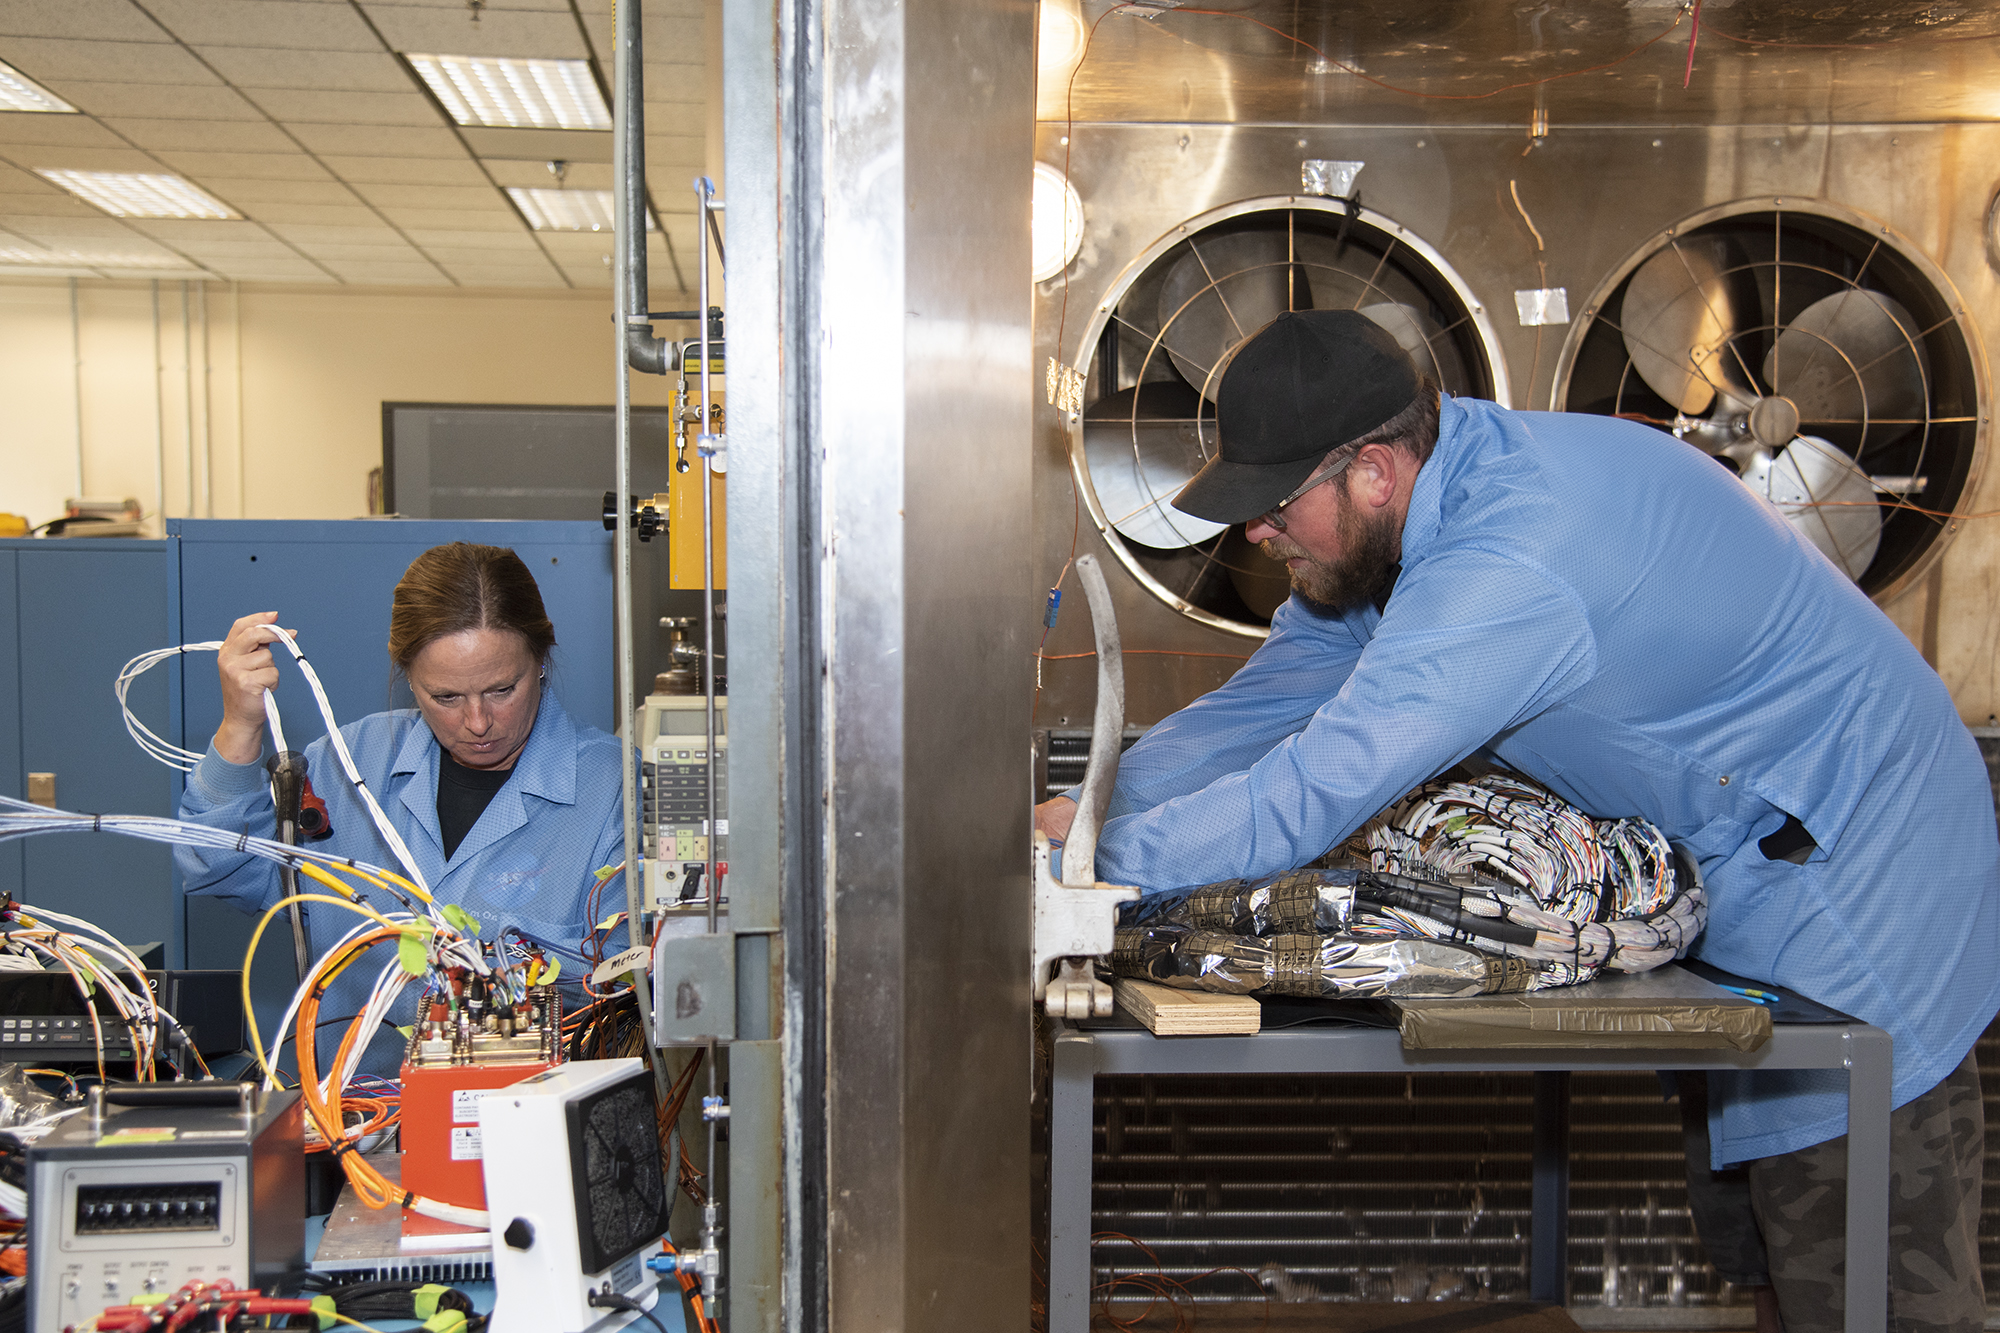 April Torres and Kyle Dauk set up for a thermal test of components in the Environmental Laboratory at NASA’s AFRC.